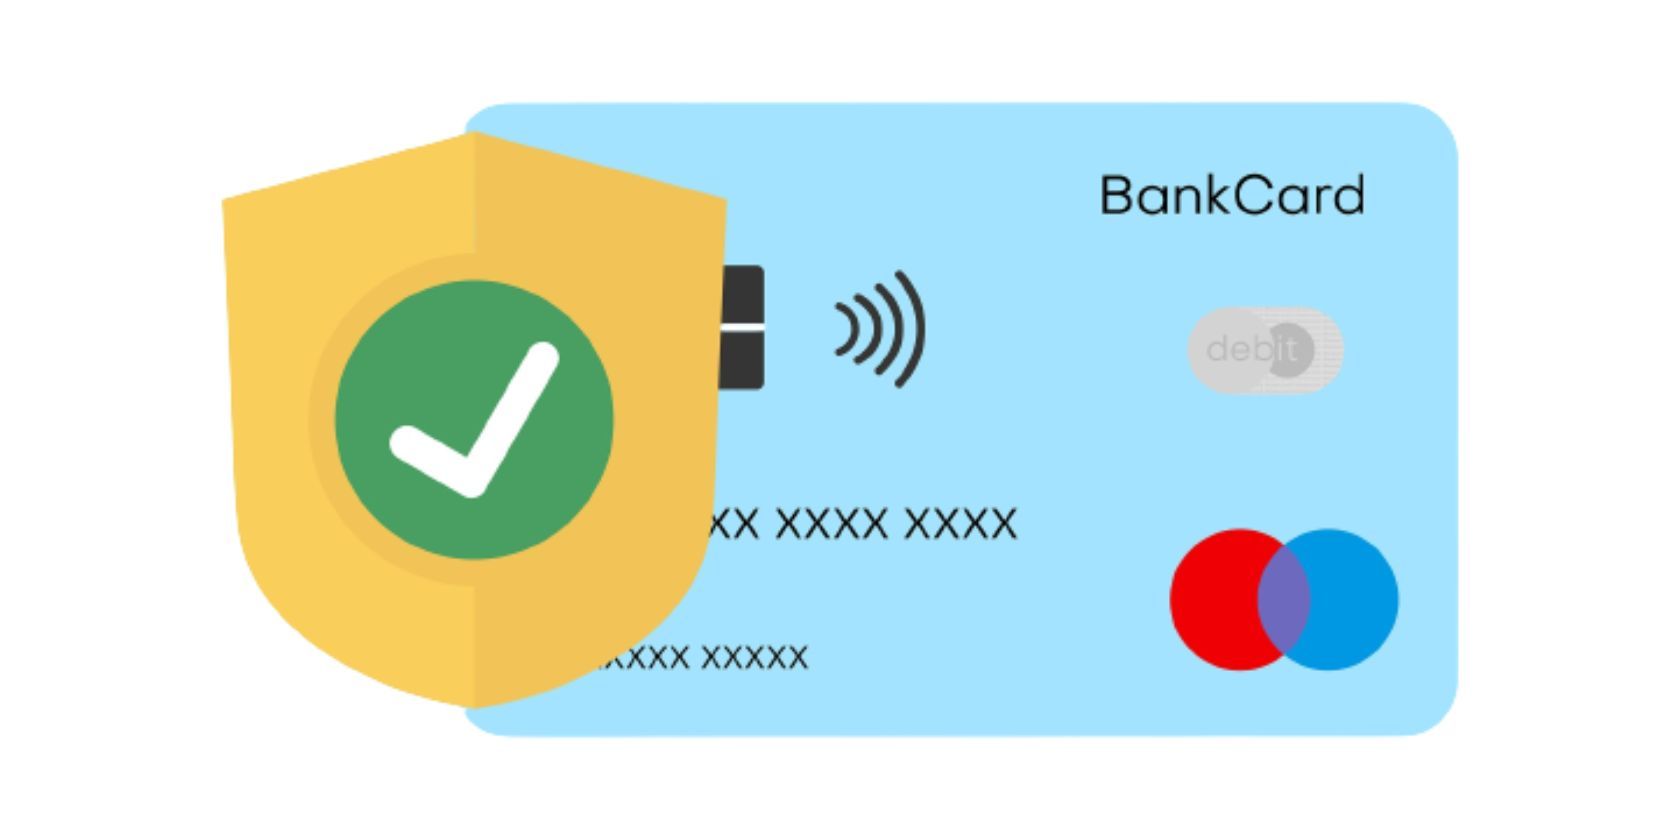 Graphic illustration of a shield symbolizing security next to a credit card